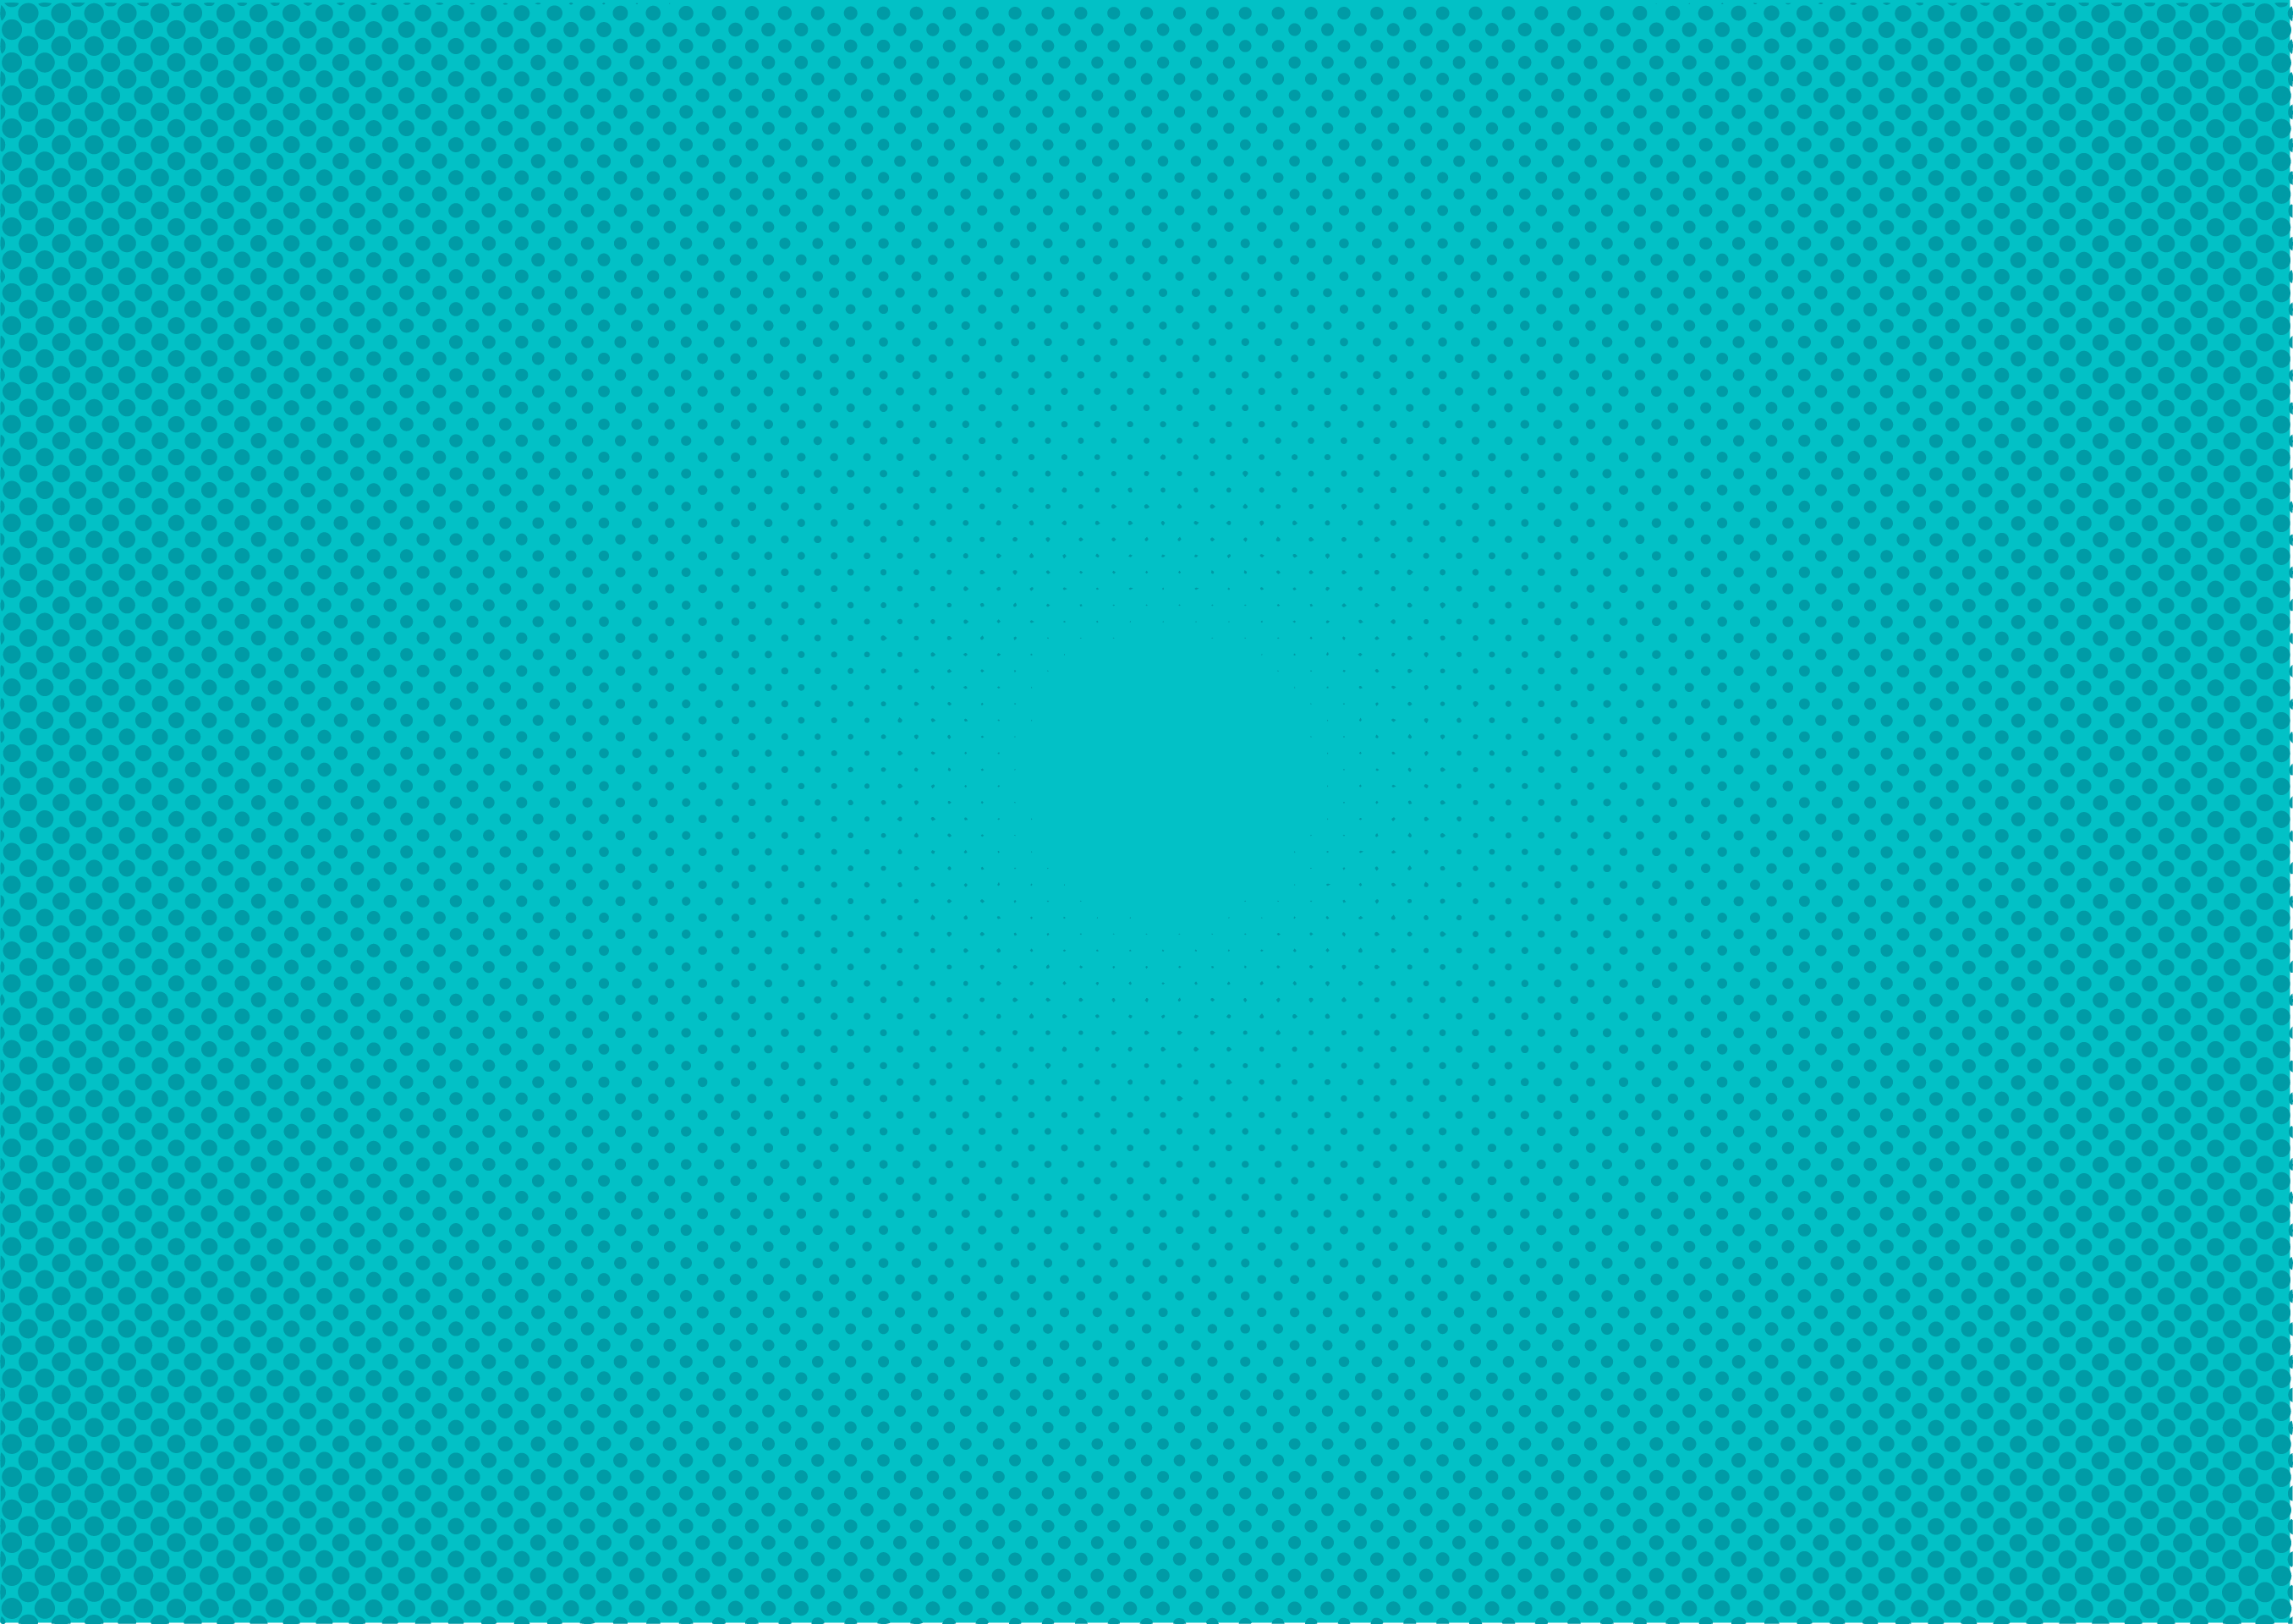 Teal background with halftone dots